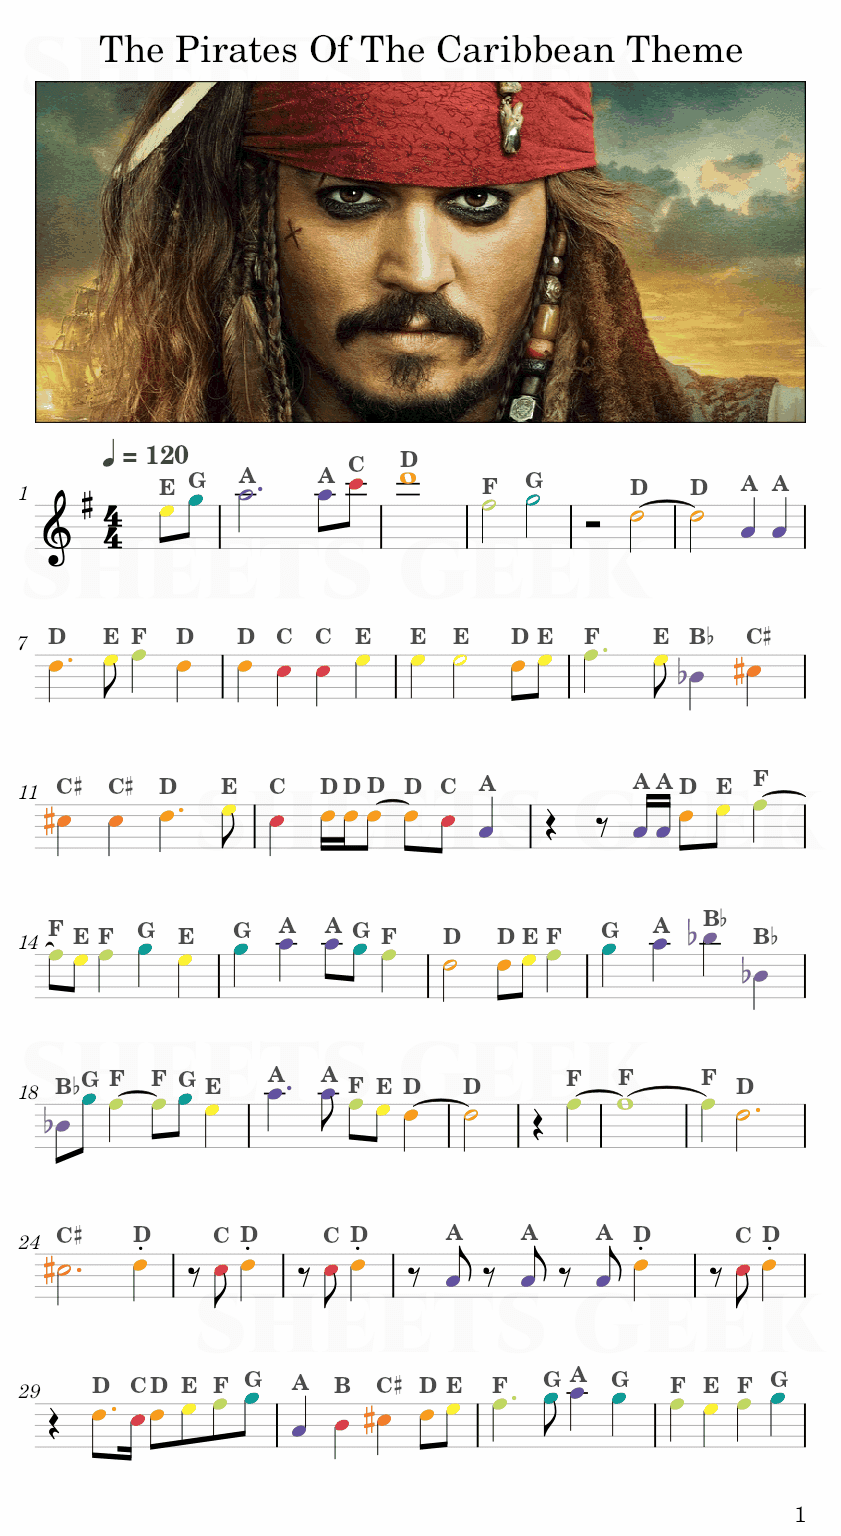 The Pirates Of The Caribbean Theme Easy Sheets Music Free for piano, keyboard, flute, violin, sax, celllo 1